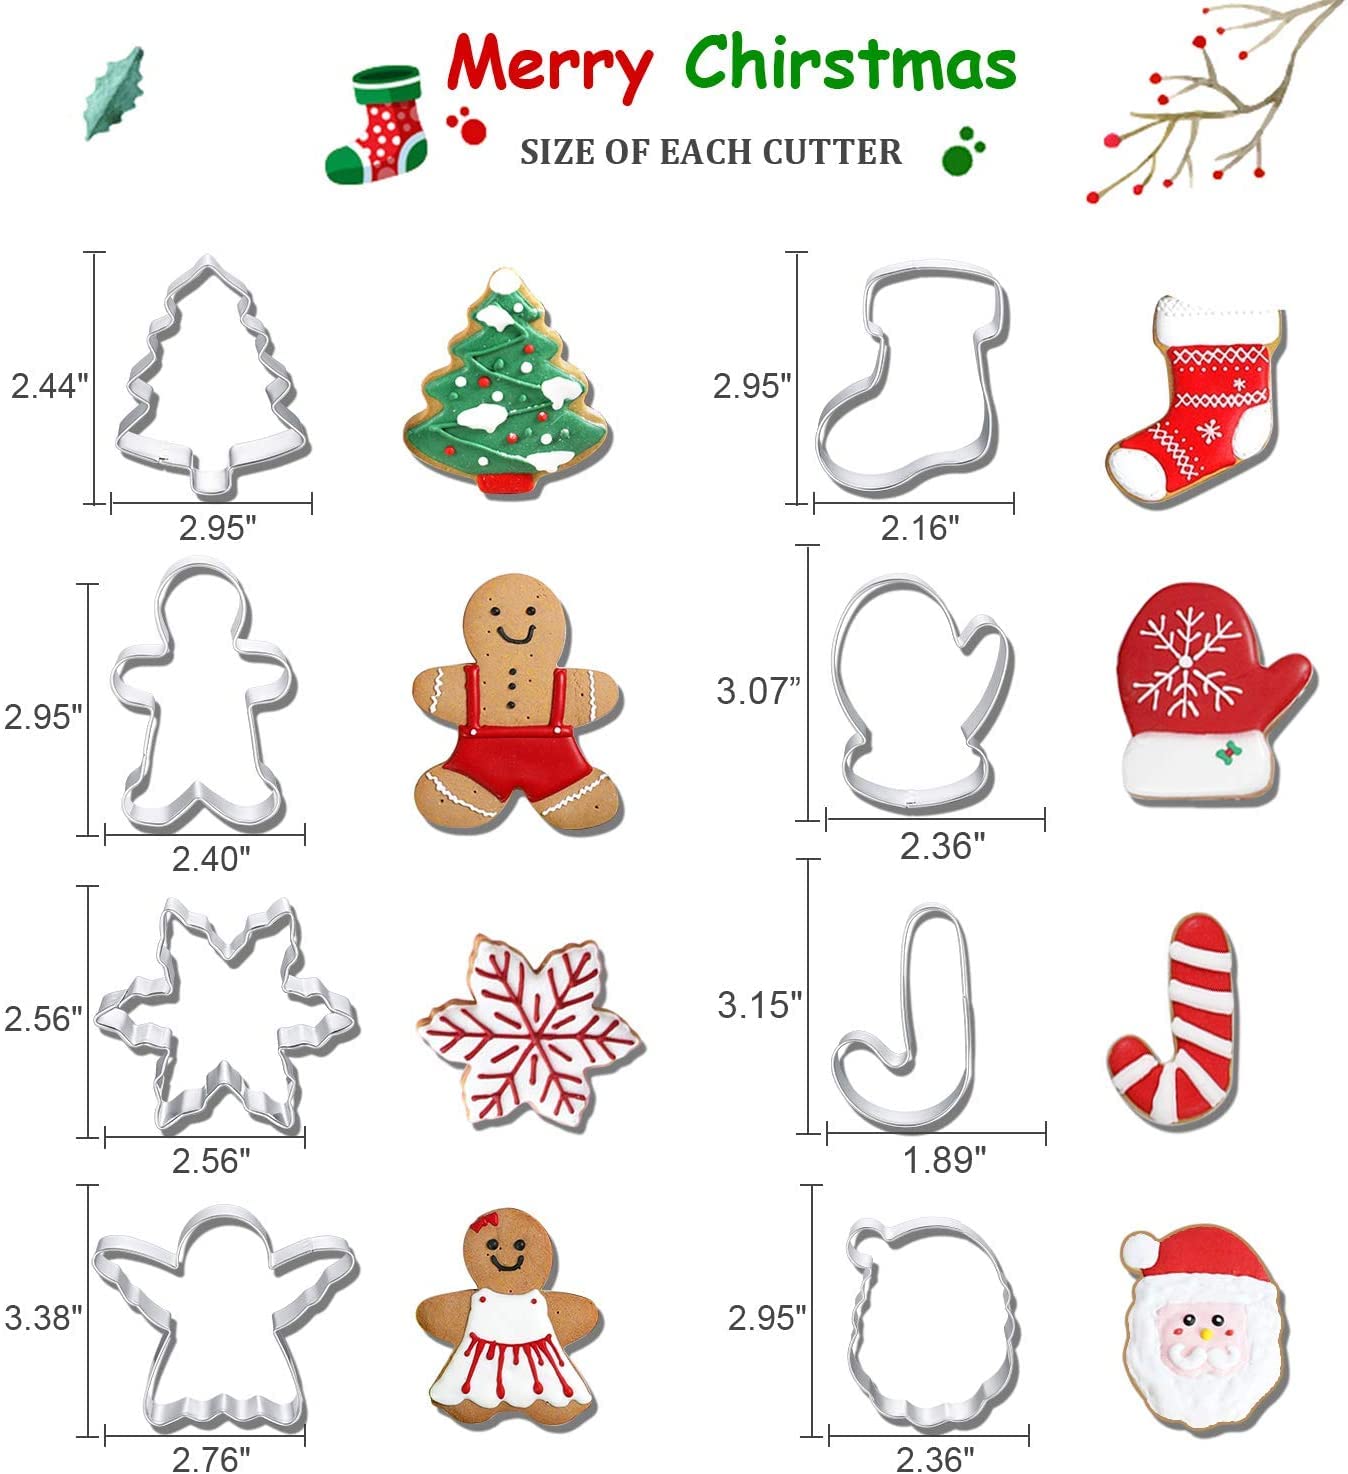 Christmas Cookie Cutters, 8Pcs Winter Holiday Cookie Cutter Set, Stainless Steel Metal Cutter with Gingerbread Men,Christmas Tree,Snowflake, Candy Cane, Angel, Santa Face,Stocking,Mitten